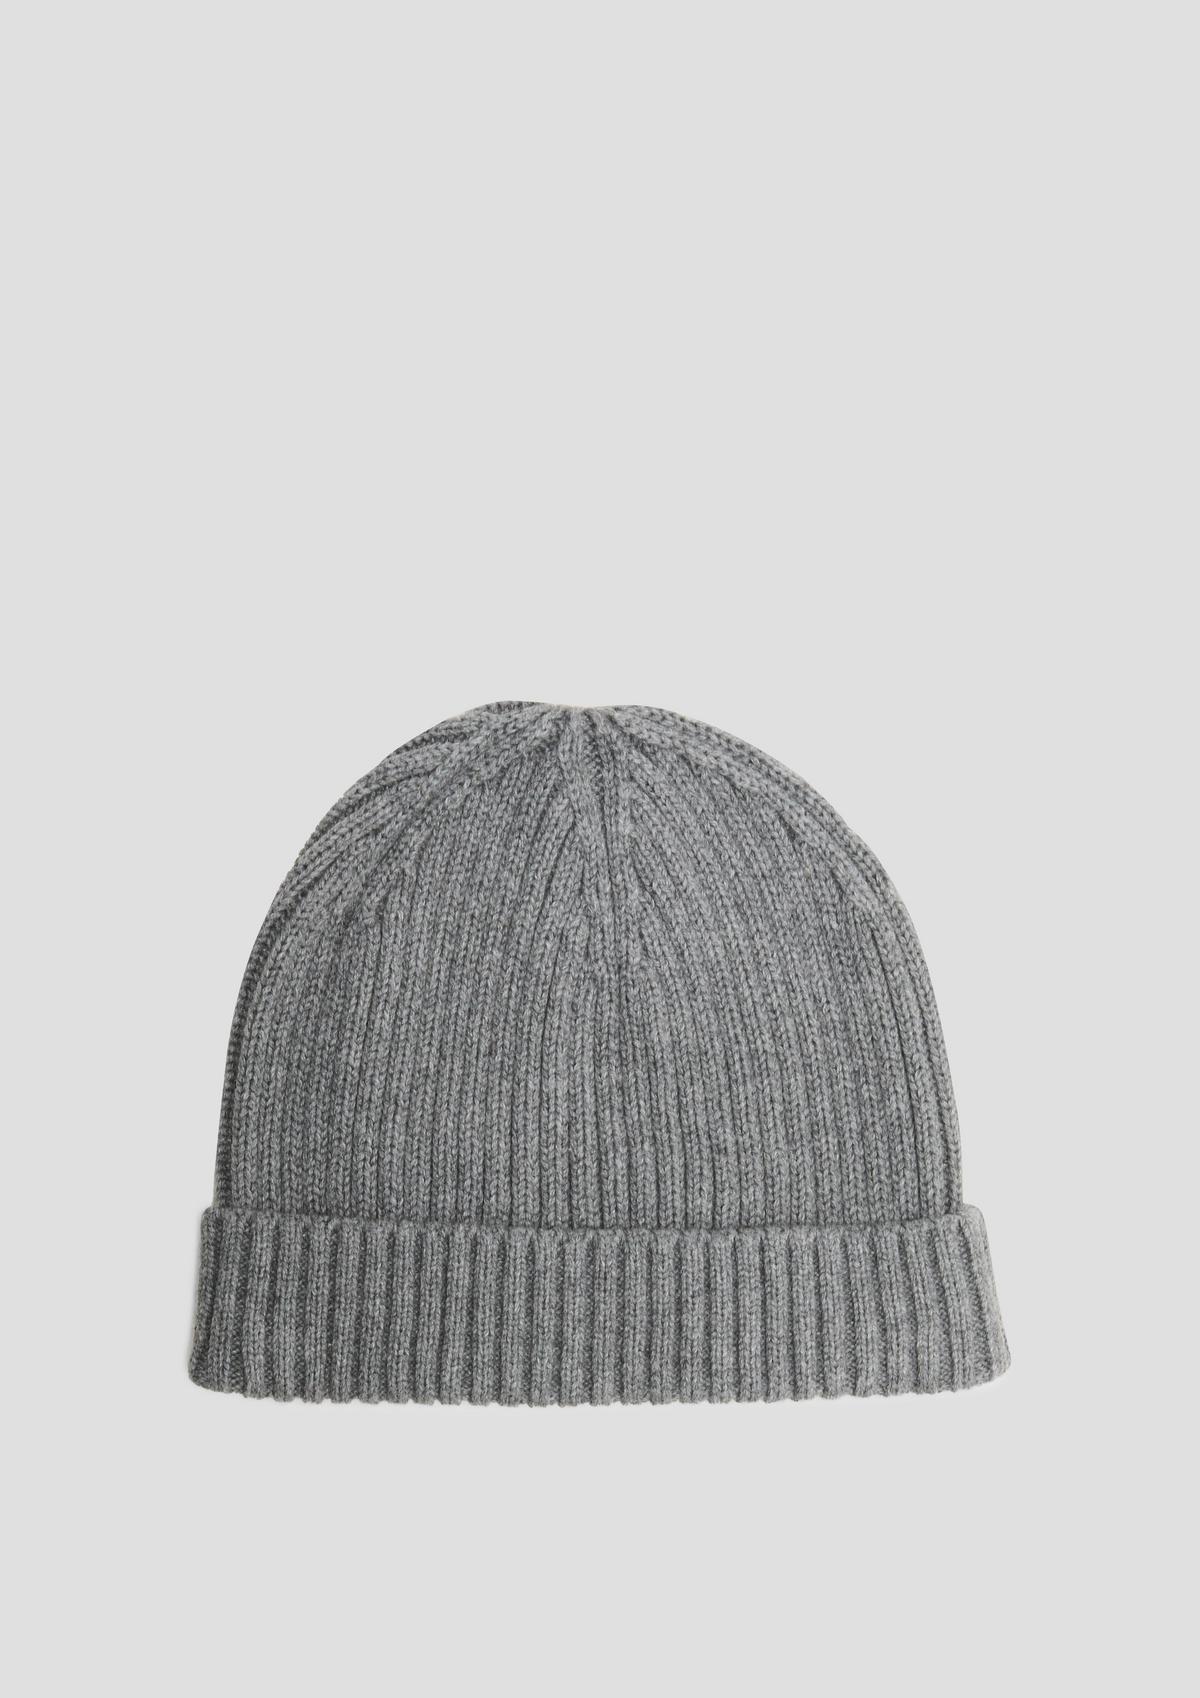 Knitted hat made of cotton